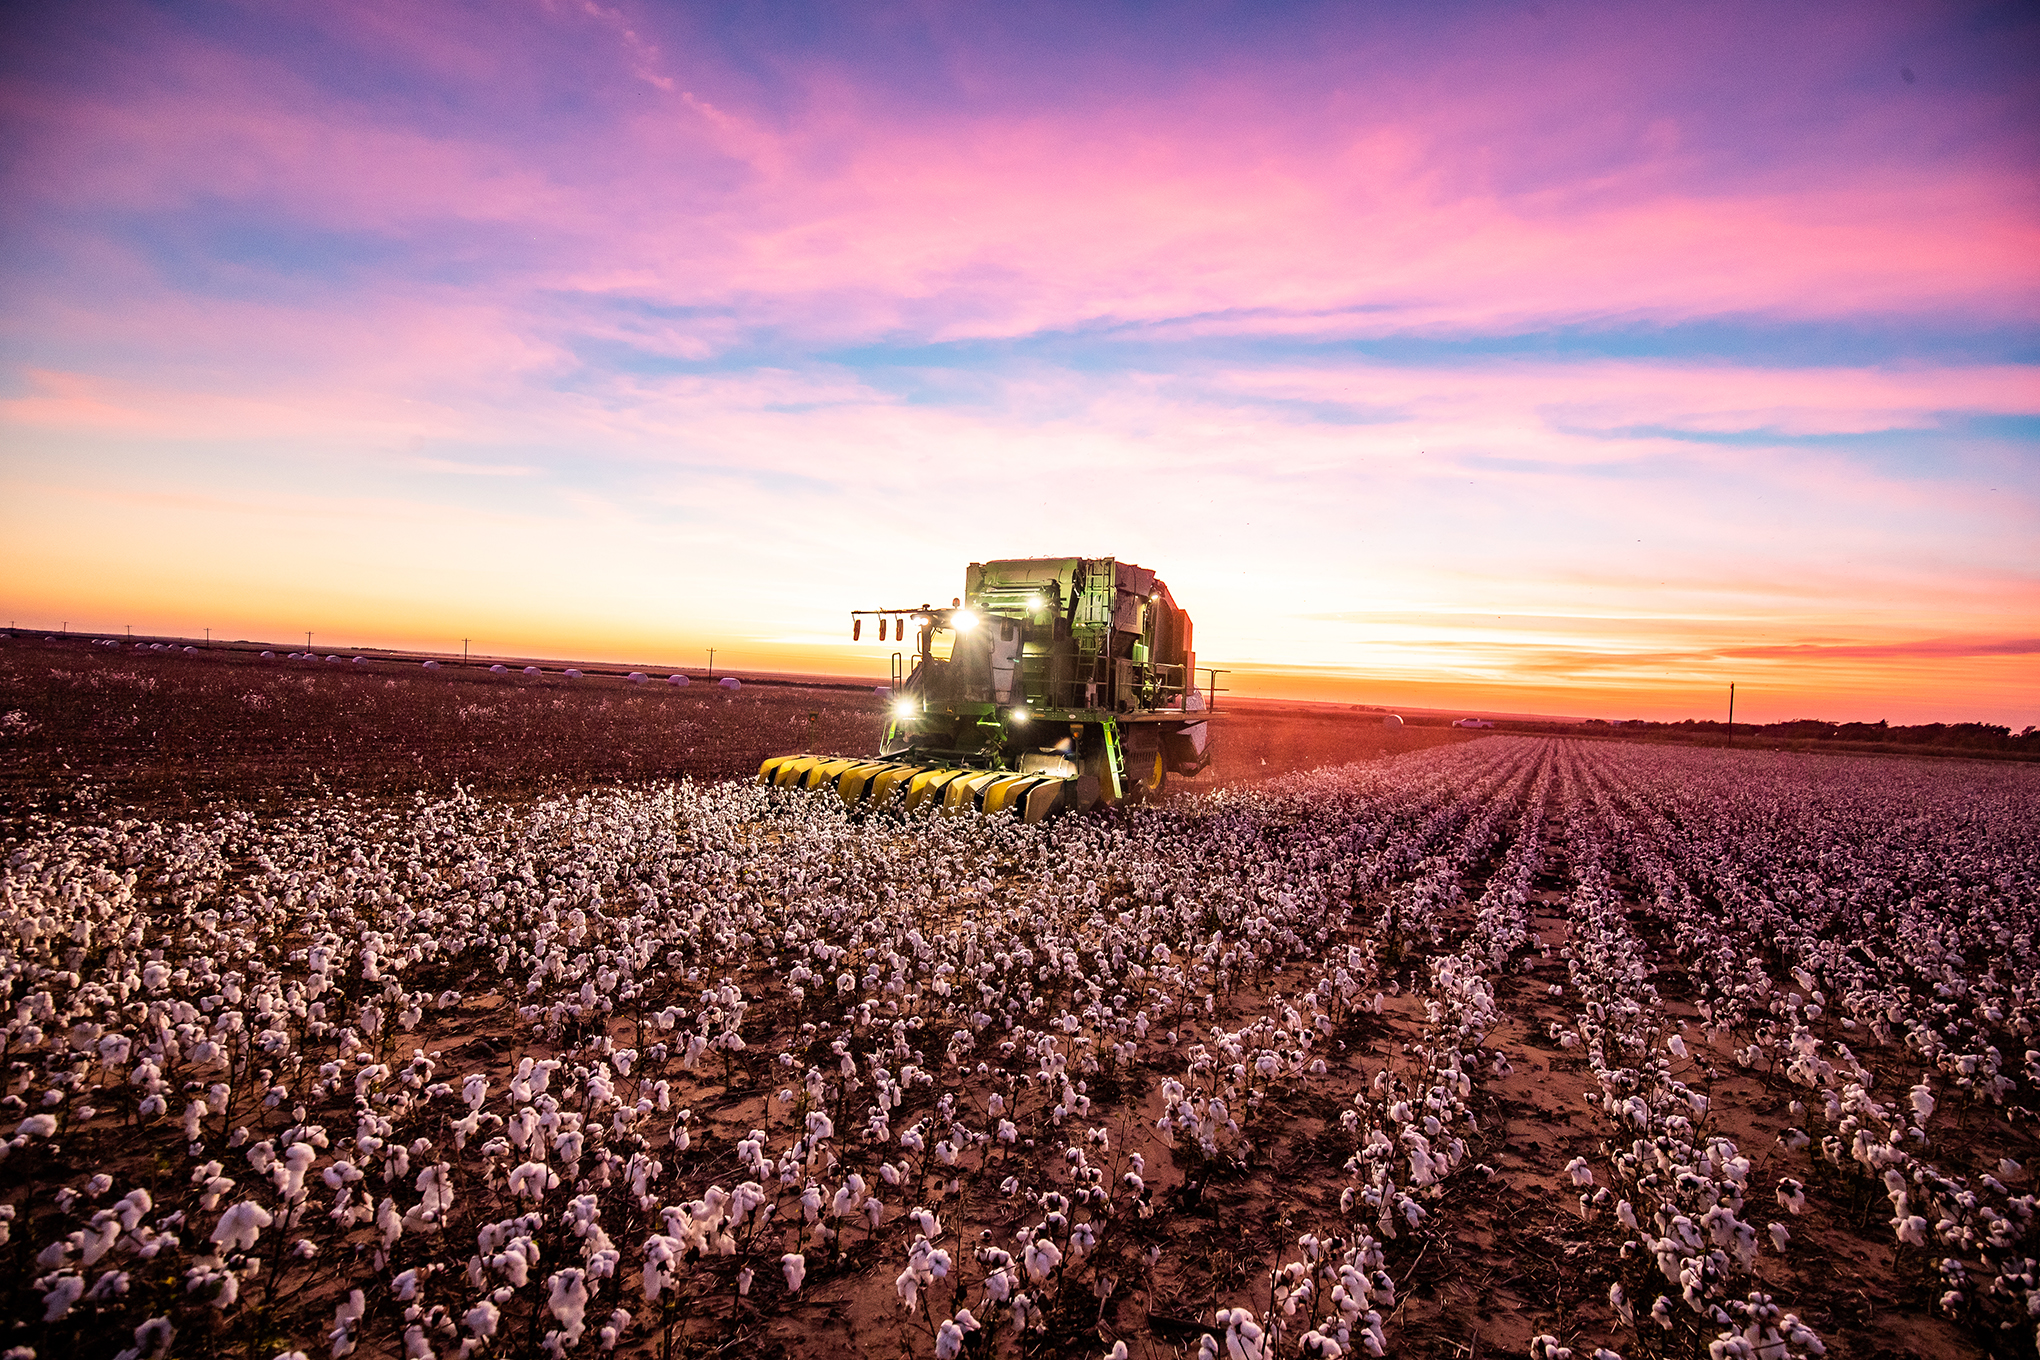 Tractor in field at dusk harvesting cotton